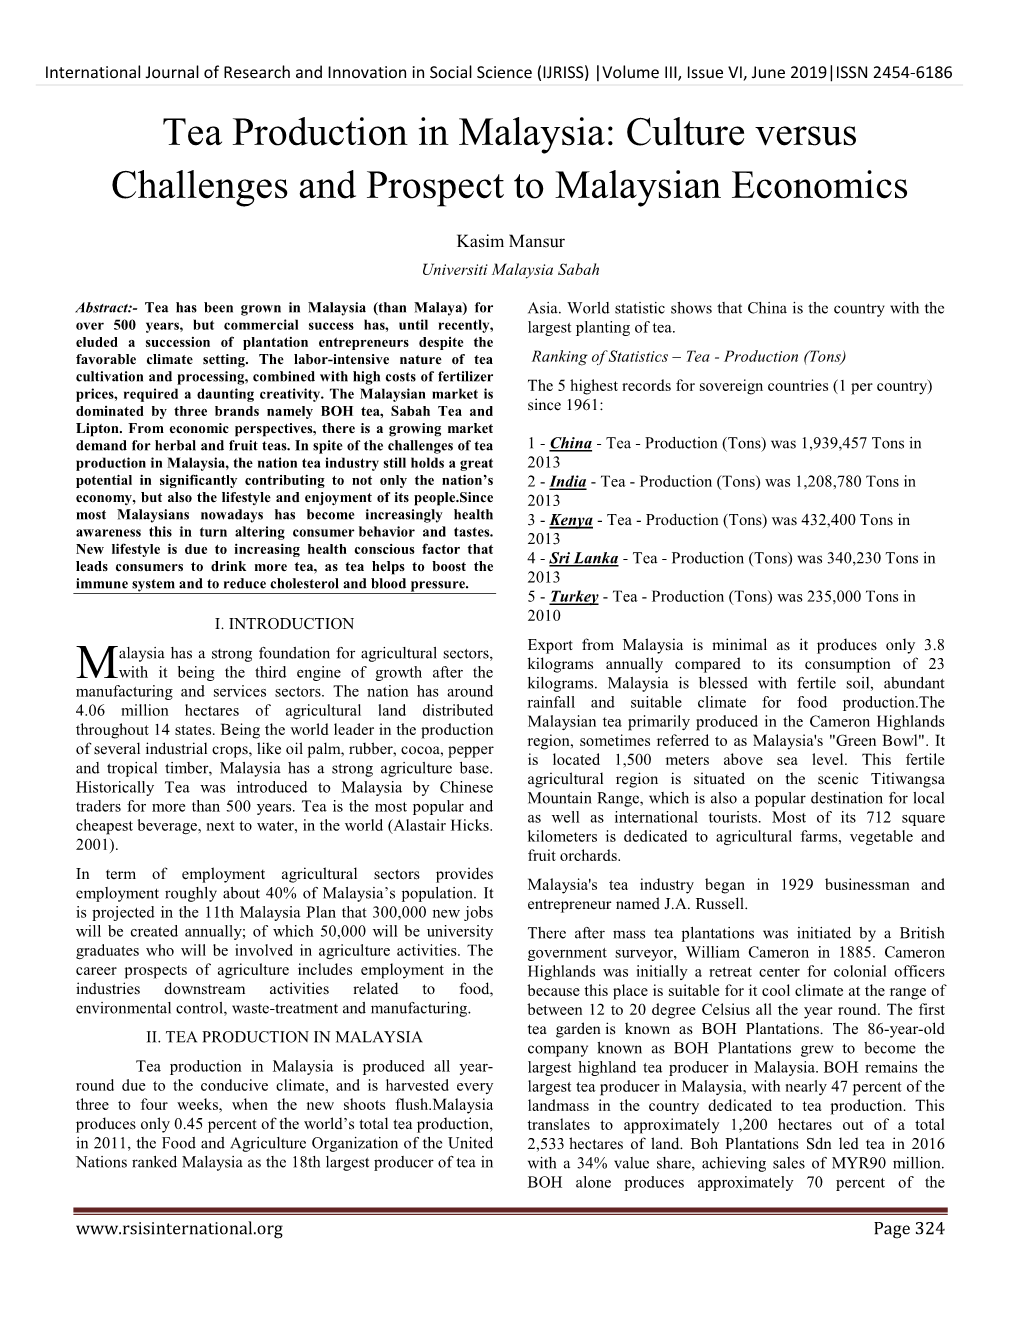 Tea Production in Malaysia: Culture Versus Challenges and Prospect to Malaysian Economics